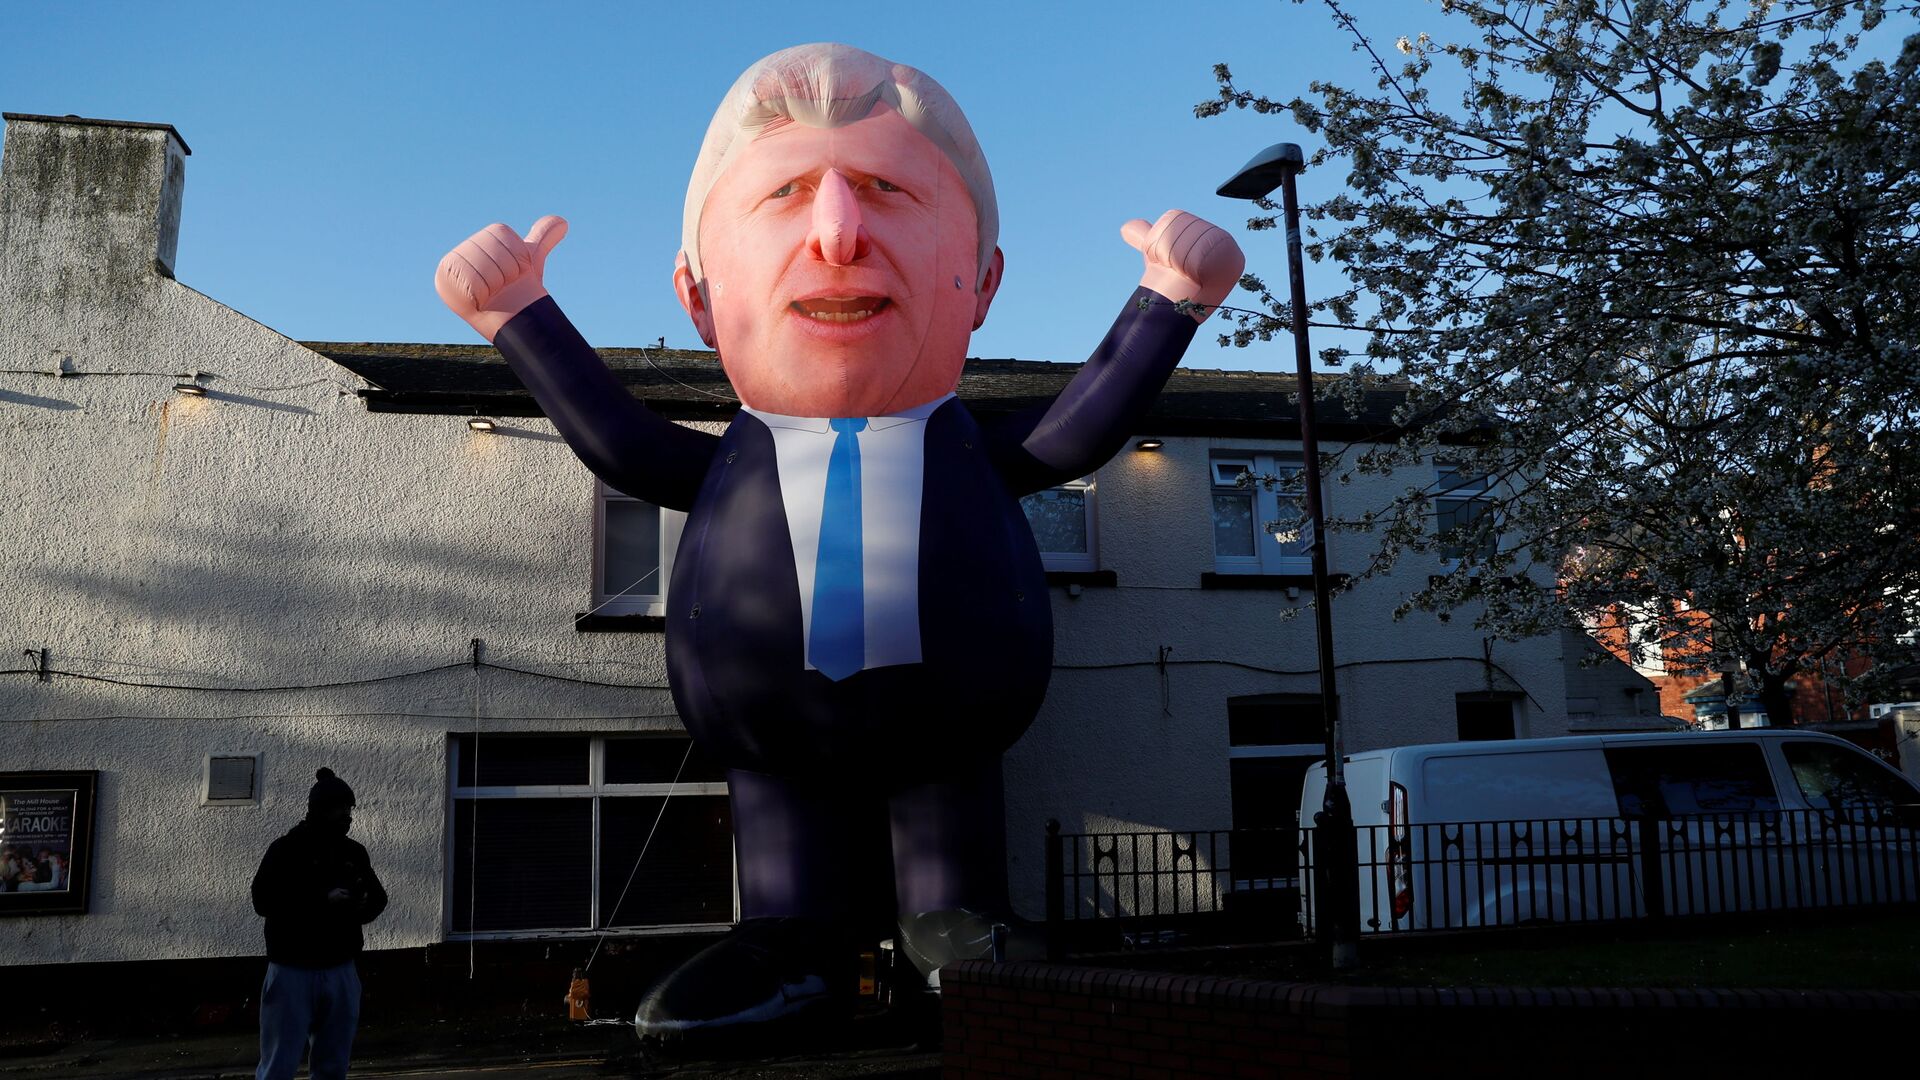 An inflatable figure of Prime Minister Boris Johnson is seen outside Mill House Leisure Centre as ballots are being counted, in Hartlepool, Britain May 7, 2021 - Sputnik International, 1920, 07.05.2021